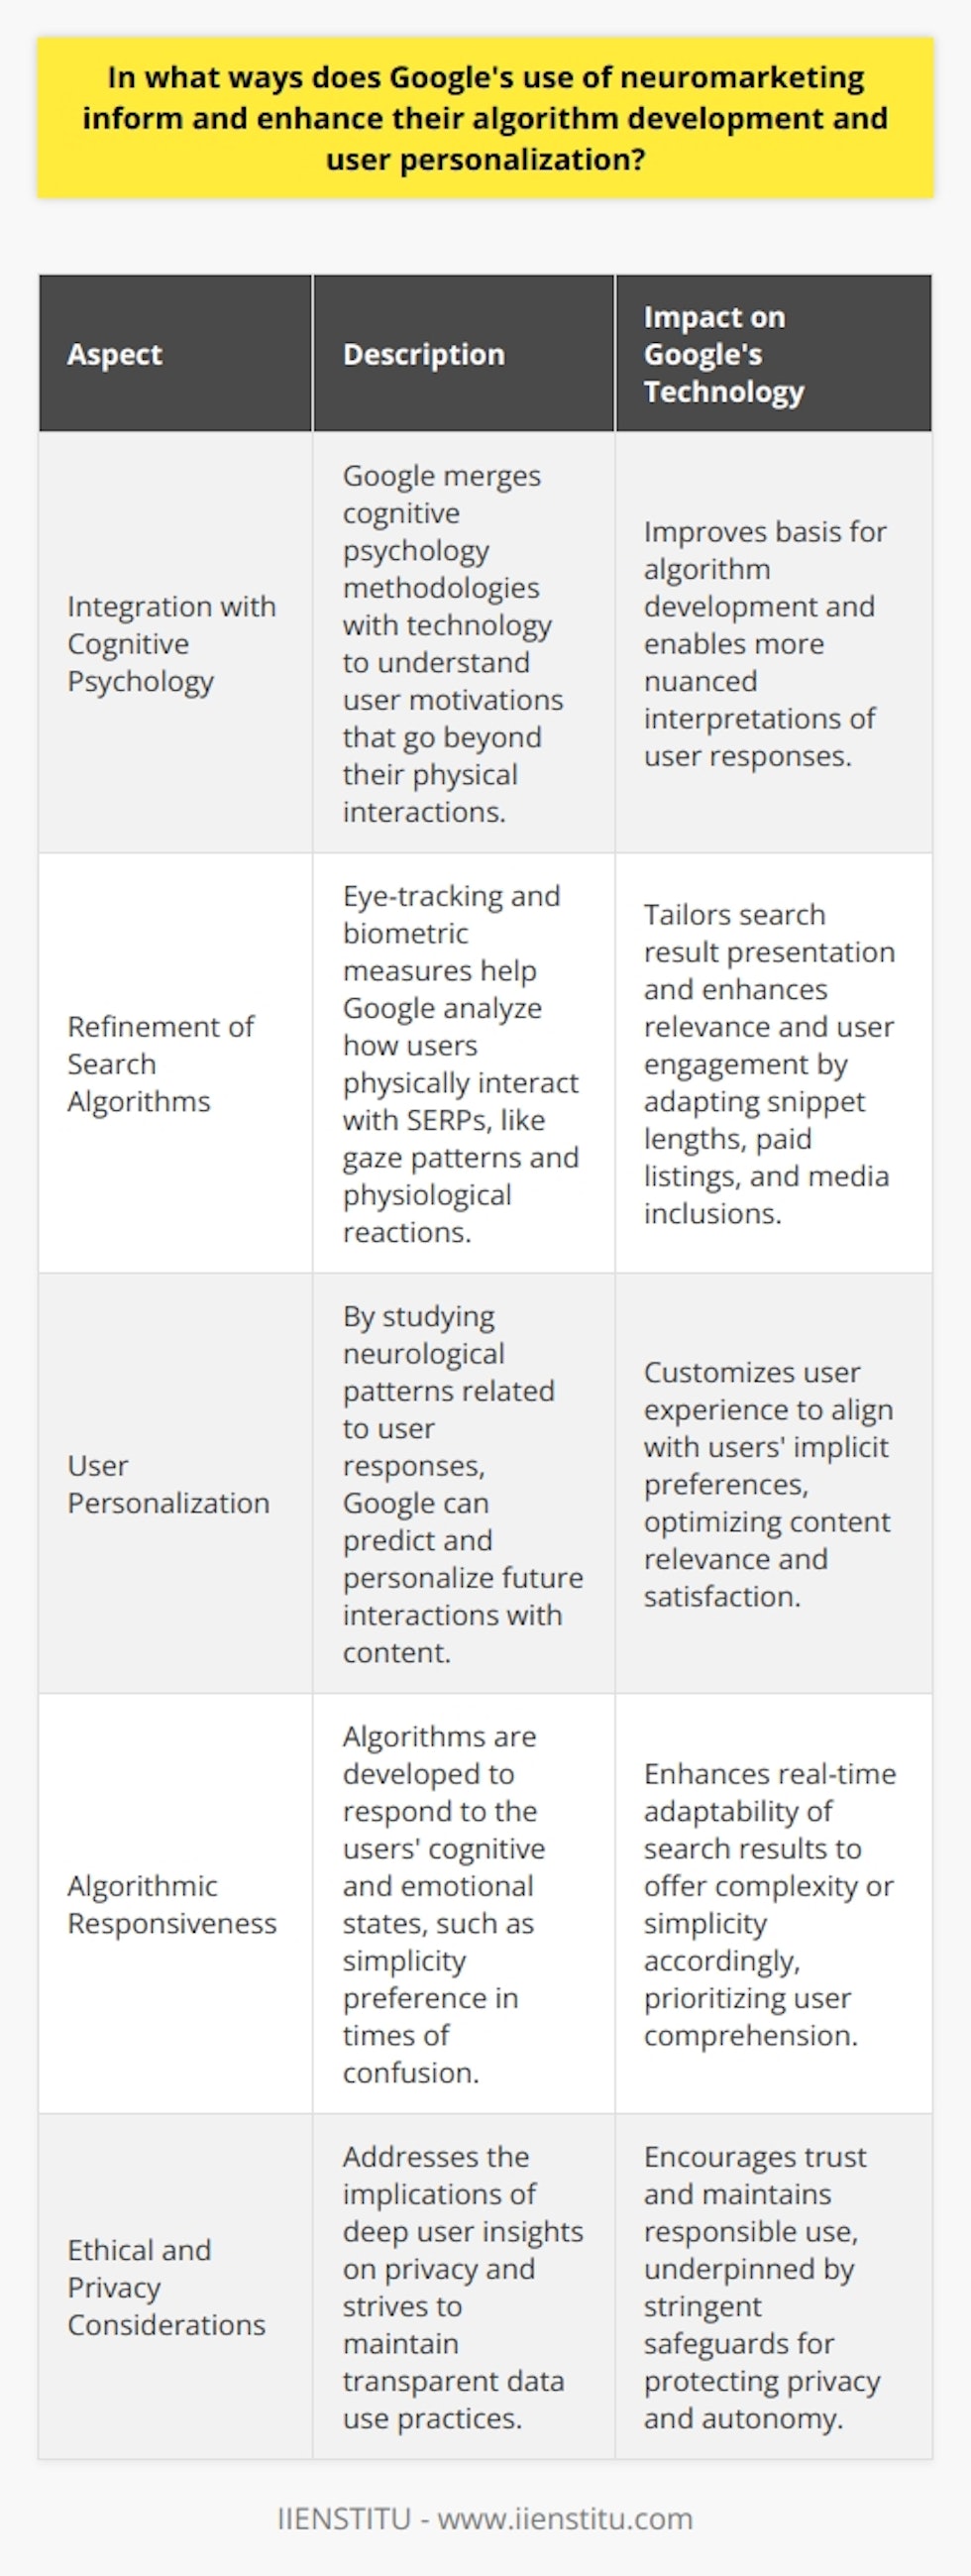 The integration of neuromarketing into Google's suite of tools and techniques marks a juncture between cognitive psychology and technology. This convergence allows Google to gather and interpret data related to the intrinsic motivations and unconscious responses of users, which is not easily deducible from overt behavior alone.**Refinement of Search Algorithms Through User Insights**By implementing neuromarketing approaches, such as eye-tracking and biometric measures, Google can study how users interact with its search engine on a deeper level. Understanding where users look on a SERP, for instance, can lead to fine-tuning of elements such as snippet length, the positioning of paid listings, or the inclusion of rich media like videos and images. These subtle but impactful adjustments are powered by neuroscientific insights, aiming to deliver a search experience that aligns with users' innate preferences and cognitive faculties.**User Personalization Anchored in Neuroscientific Understanding**The personalization of services is not merely about tracking and analyzing behavior; it also involves predicting future actions based on neurological responses to content. Google can customize and refine the user experience far beyond simplistic algorithmic responses by identifying neural patterns associated with pleasure, interest, or disengagement. This might involve adjusting the sequence of search results or prioritizing certain types of content to enhance user engagement and satisfaction.**Algorithmic Response to Emotional and Cognitive Patterns**Through the use of neuromarketing data, Google's algorithms can become more sensitive to emotional and cognitive patterns. Algorithms theoretically might adapt in real-time based on whether users show signs of confusion or clarity when processing information, thereby presenting simpler or more complex search results as needed. This adaptability reflects a human-centric approach to technology design, where user comfort and comprehension remain paramount.**Ethical and Privacy Considerations**Despite the potential benefits, it's important to address the ethical and privacy implications of neuromarketing in Google's context. The intimate knowledge gained about a user's innermost responses raises significant privacy concerns. However, Google's commitment to responsible and transparent data use is essential to maintaining user trust. Therefore, as with any institution leveraging neuromarketing data, there should be stringent safeguards and ethical guidelines in place to protect individual privacy and autonomy.In conclusion, Google's application of neuromarketing offers it a unique lens through which it can view and interpret user information, guiding the evolution of its search algorithms and allowing for bespoke user experiences. It is an exercise in balancing technological advancement with ethical responsibility, and, when executed judiciously, it can lead to significant benefits for both Google and its global user base.